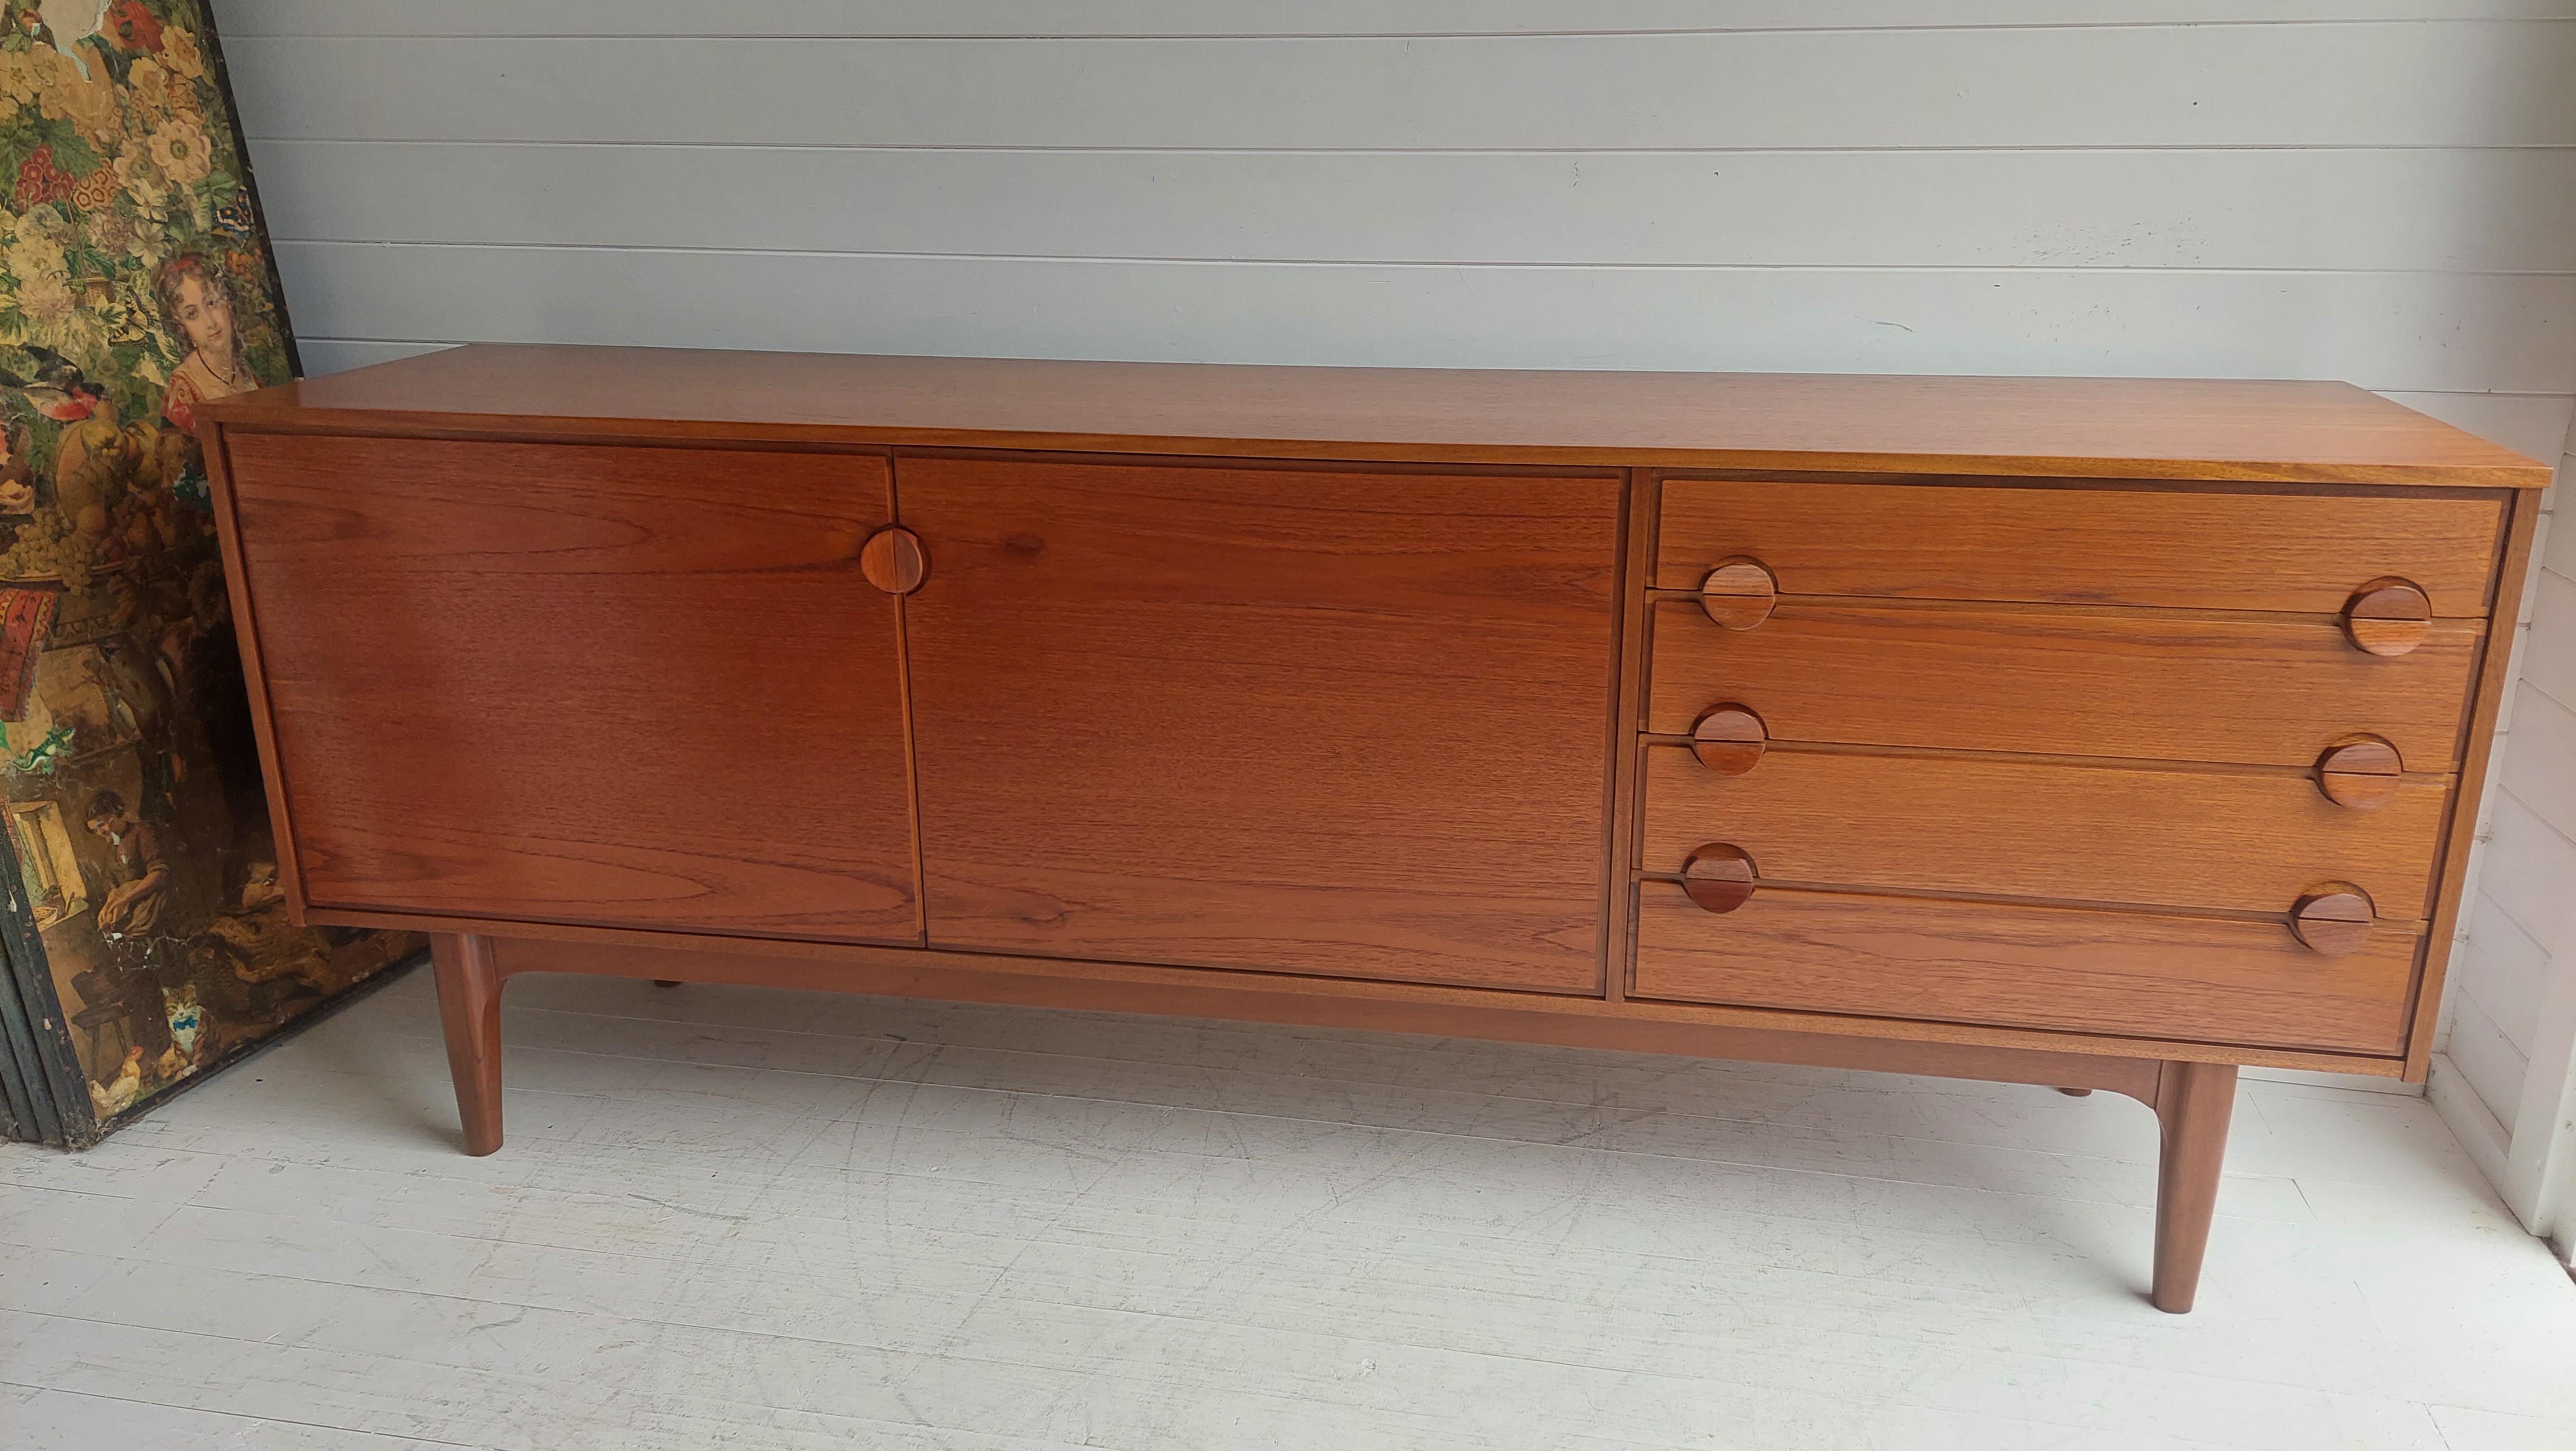 A simply stunning 1960/70s Nathan teak Danish style sideboard.
A very rare an scarcely seen. We have just been able to find a couple sold in the past and just with the compact version.
A very desirable piece, in excellent restored condition -